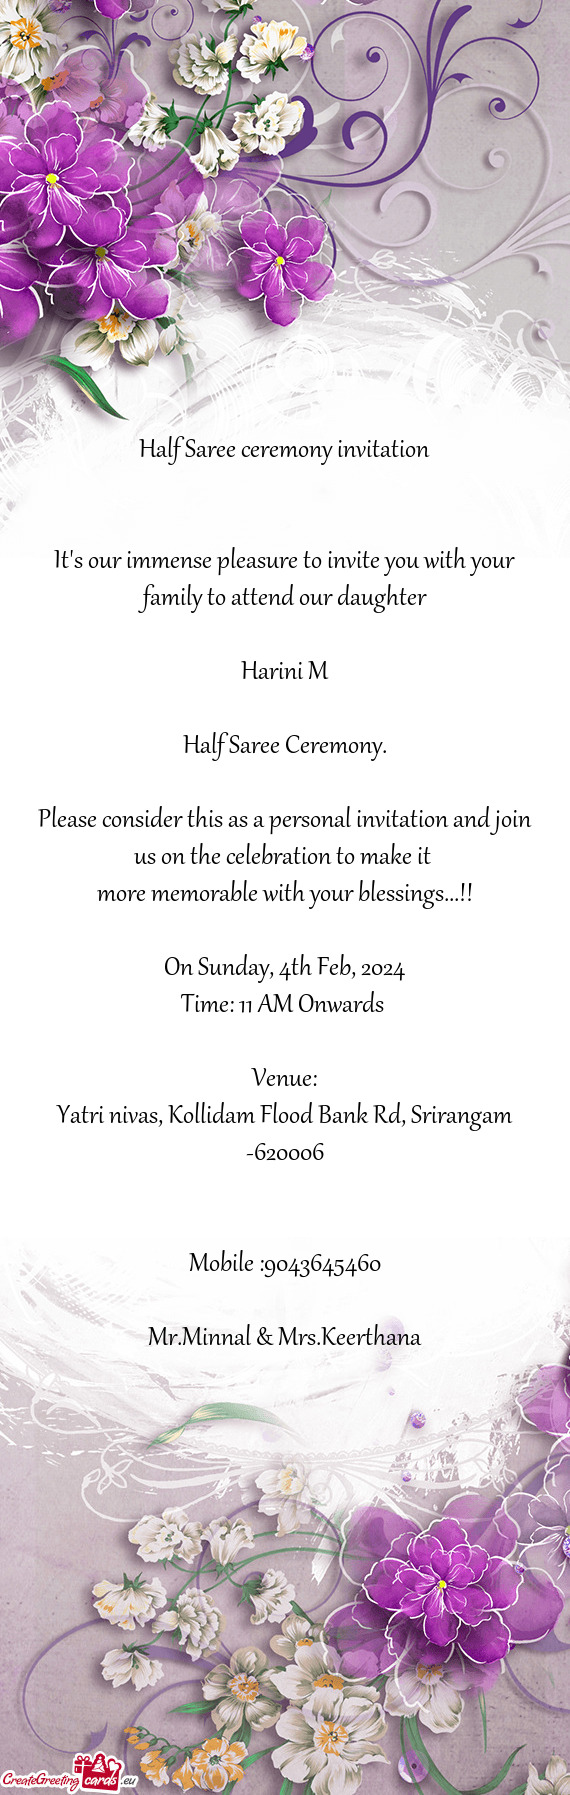 Please consider this as a personal invitation and join us on the celebration to make it